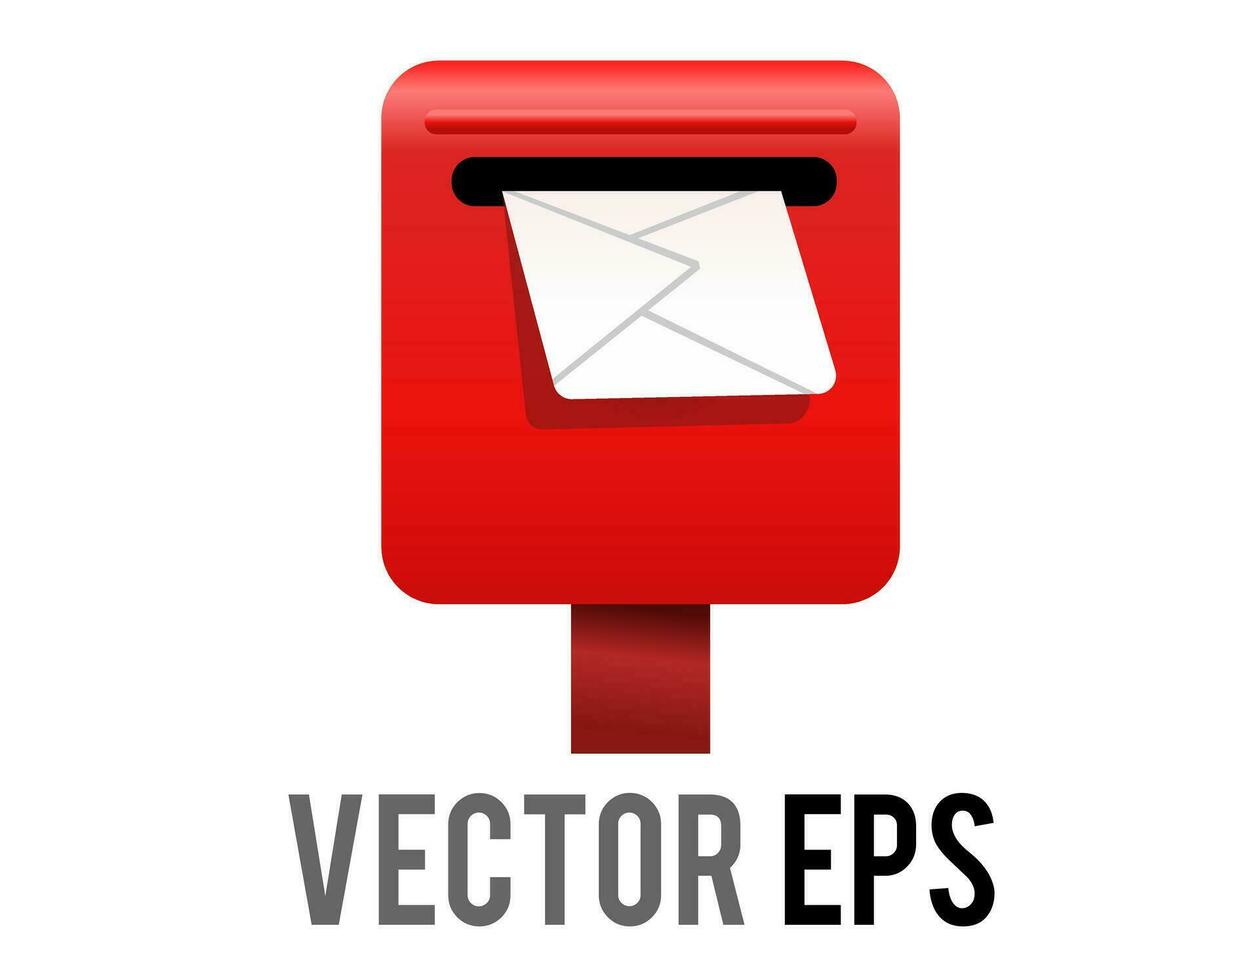 Vector red Japan public mailbox, postbox, letterbox icon with white letter or envelope